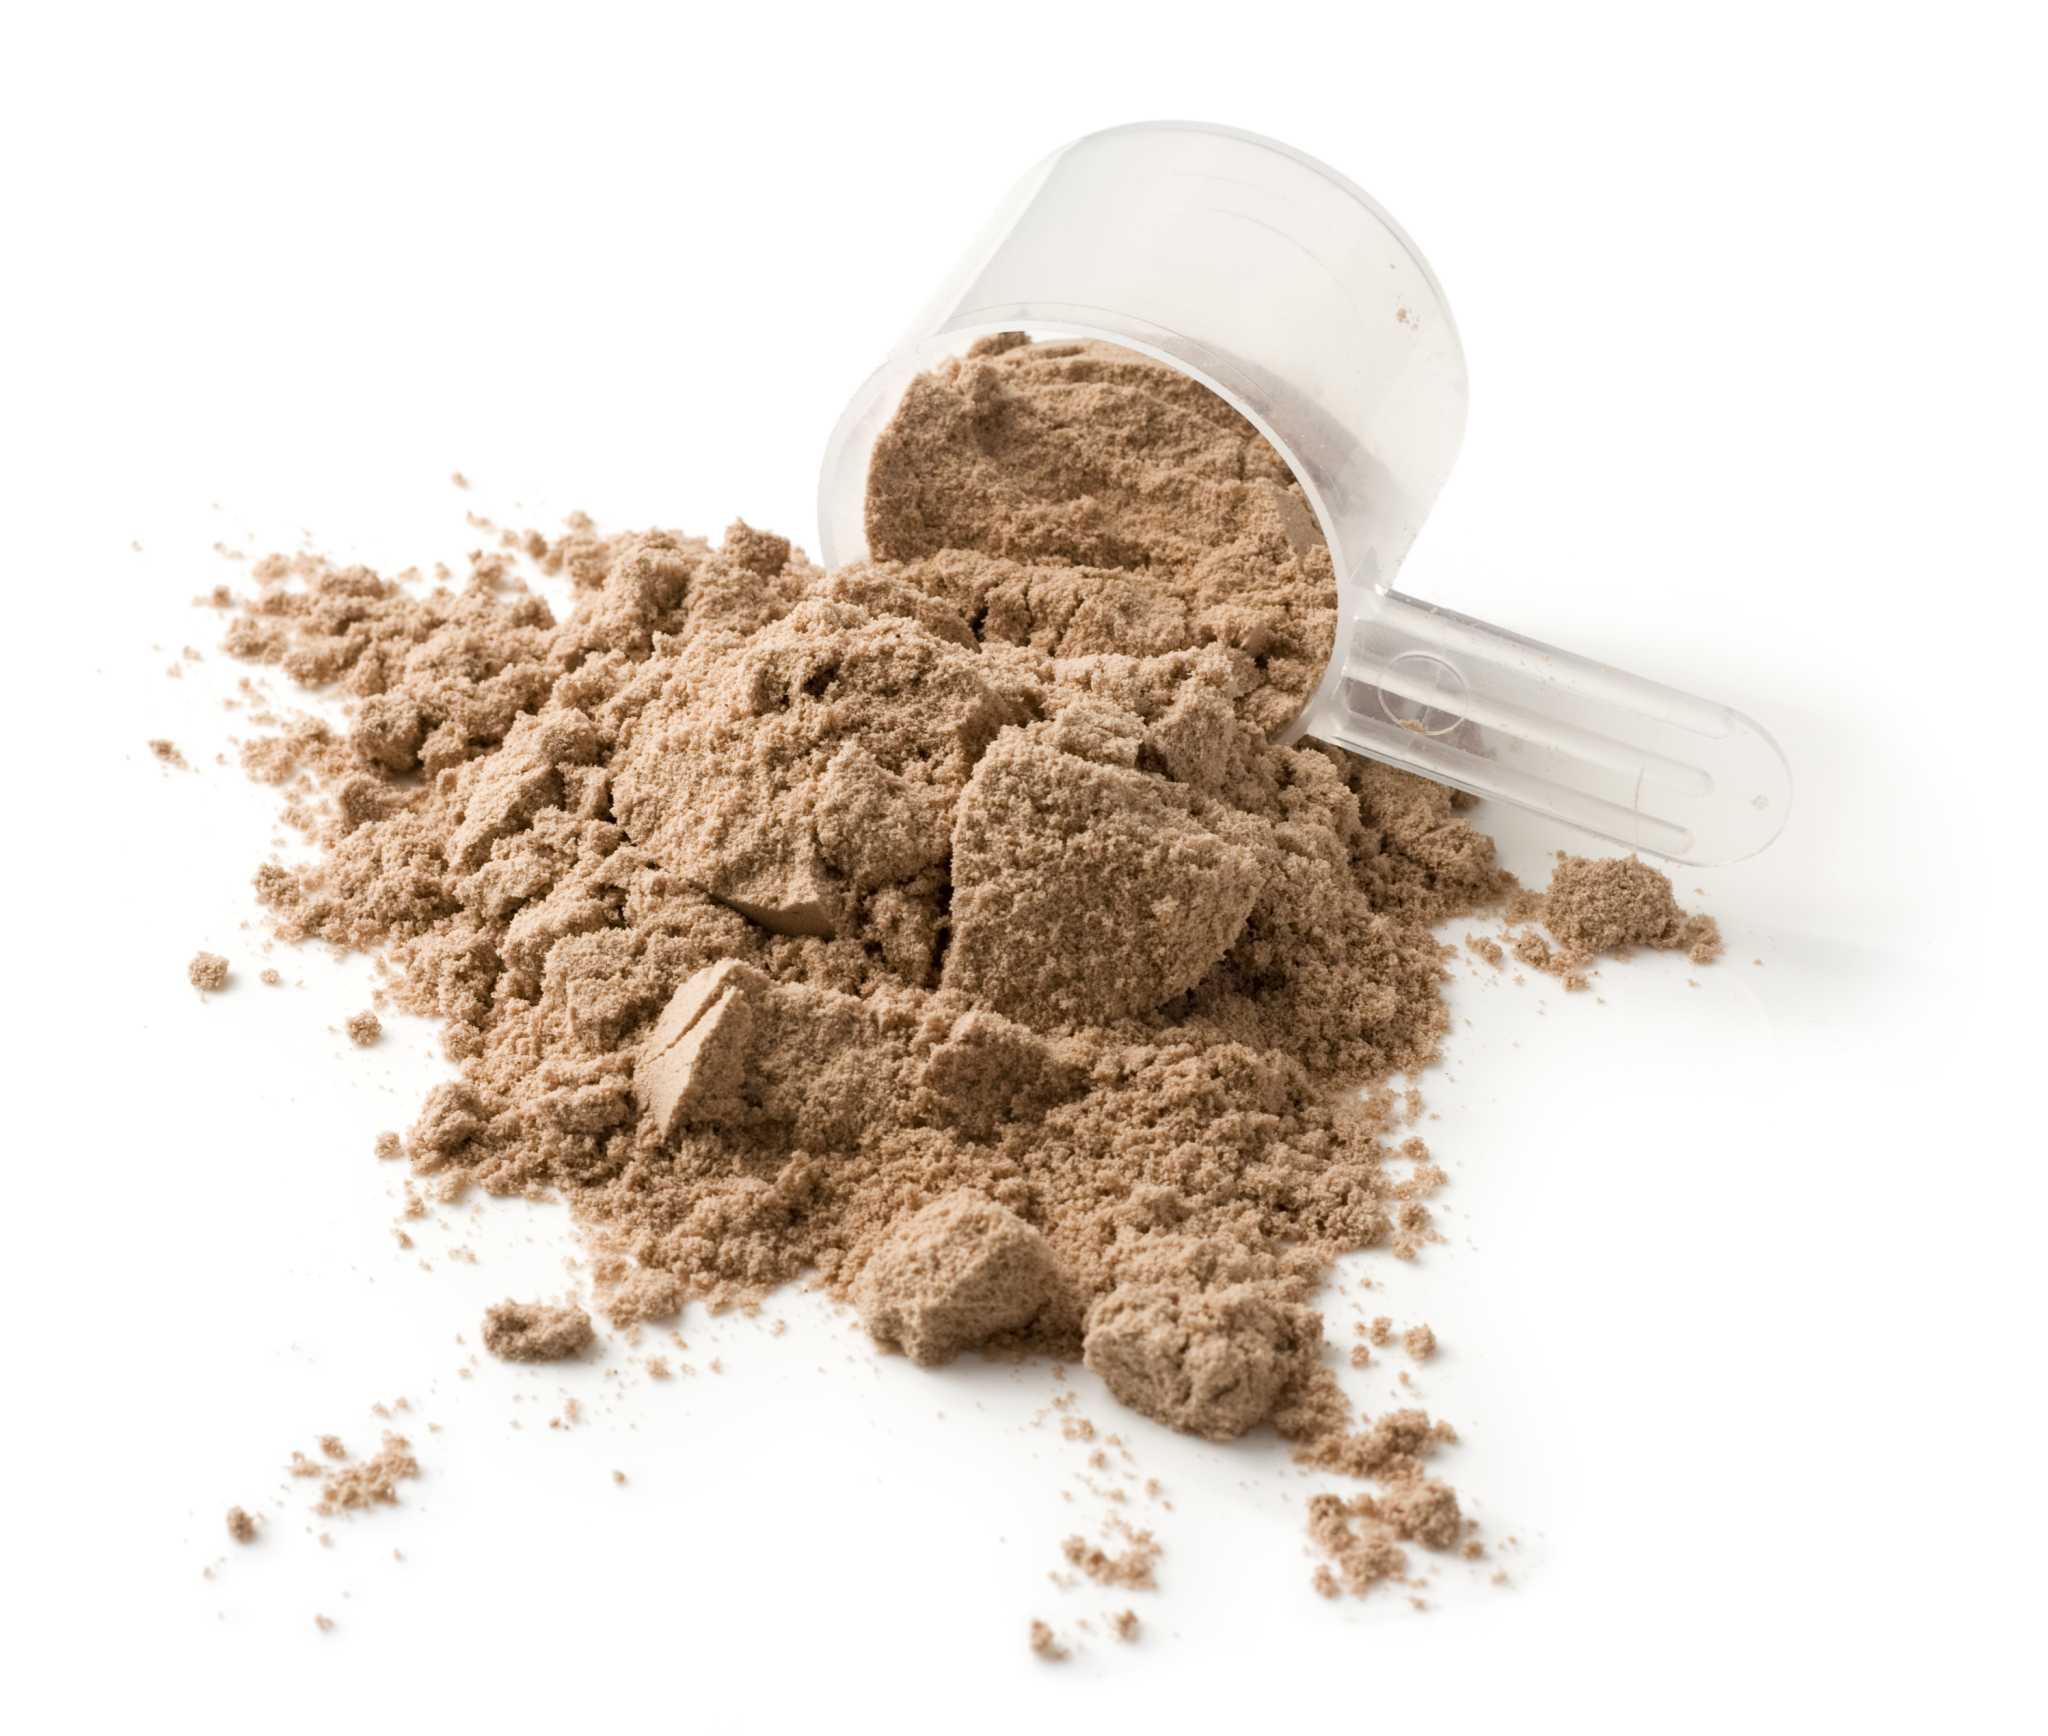 How Much is in a Scoop of Protein Powder?